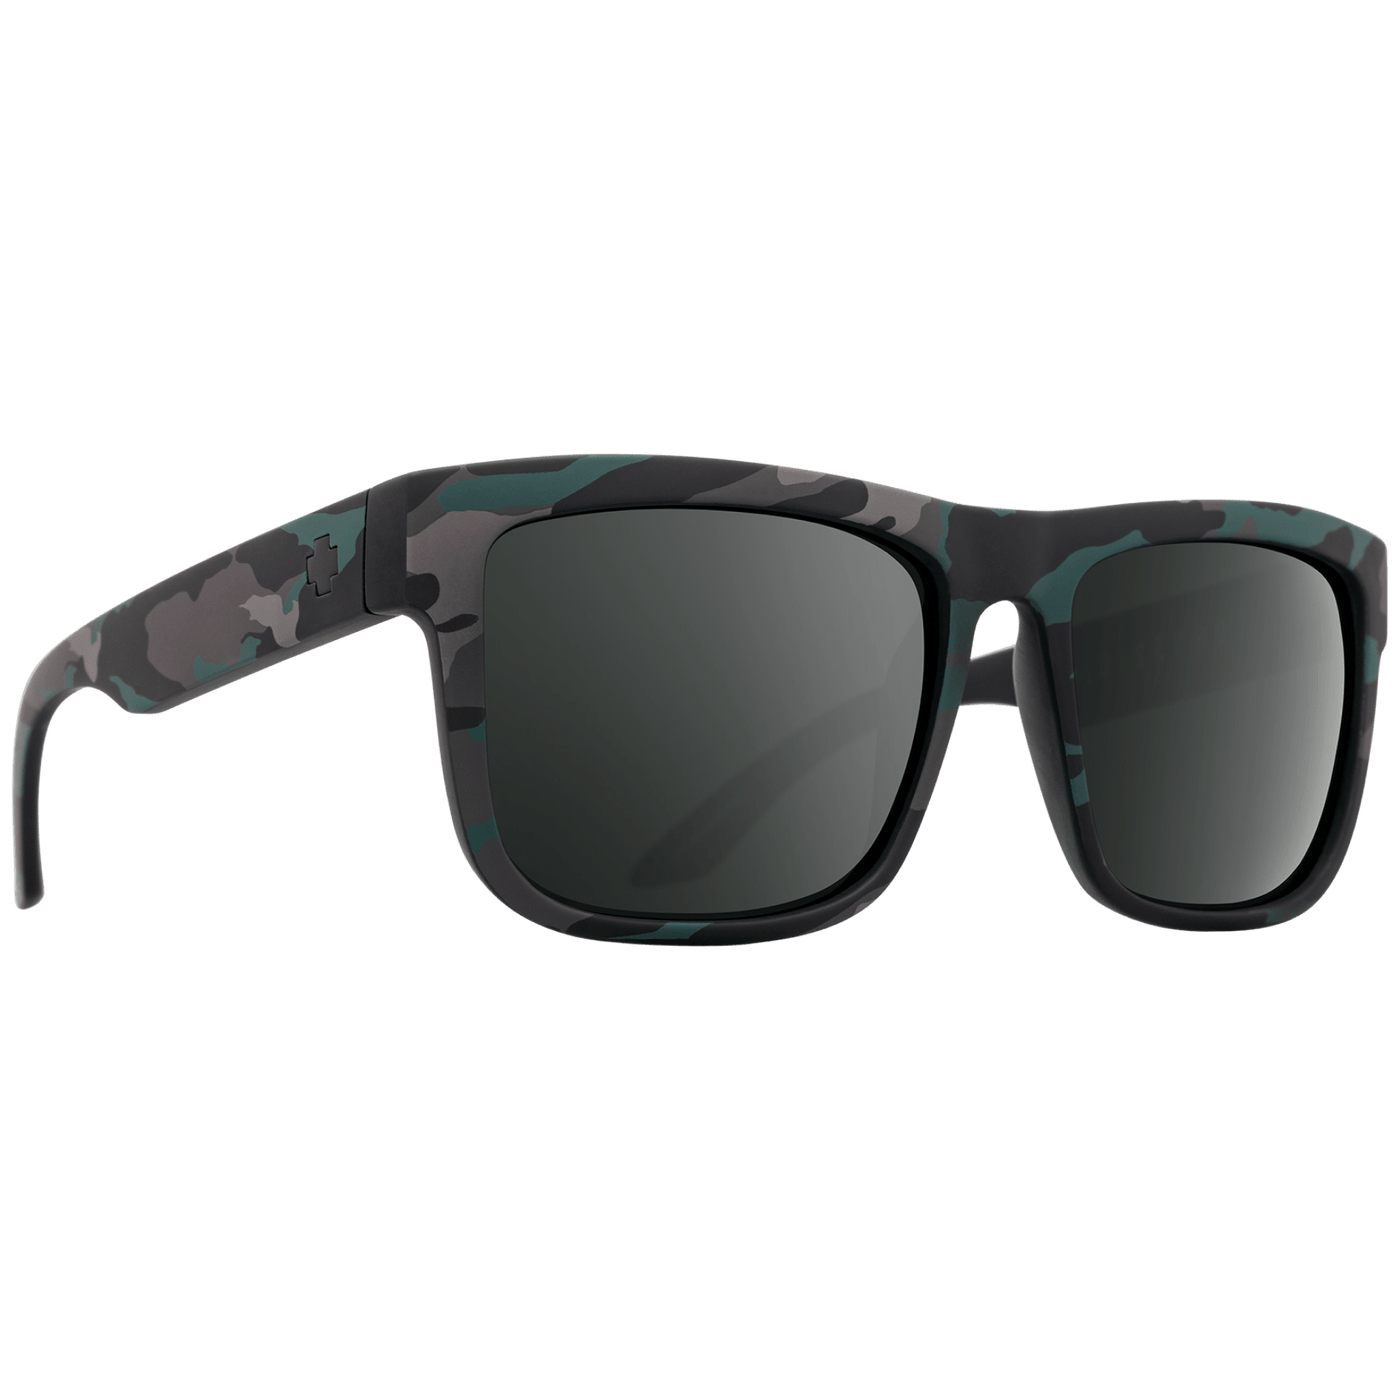 SPY Optic DISCORD Sunglasses, Happy Lens - Stealth Camo 8Lines Shop - Fast Shipping